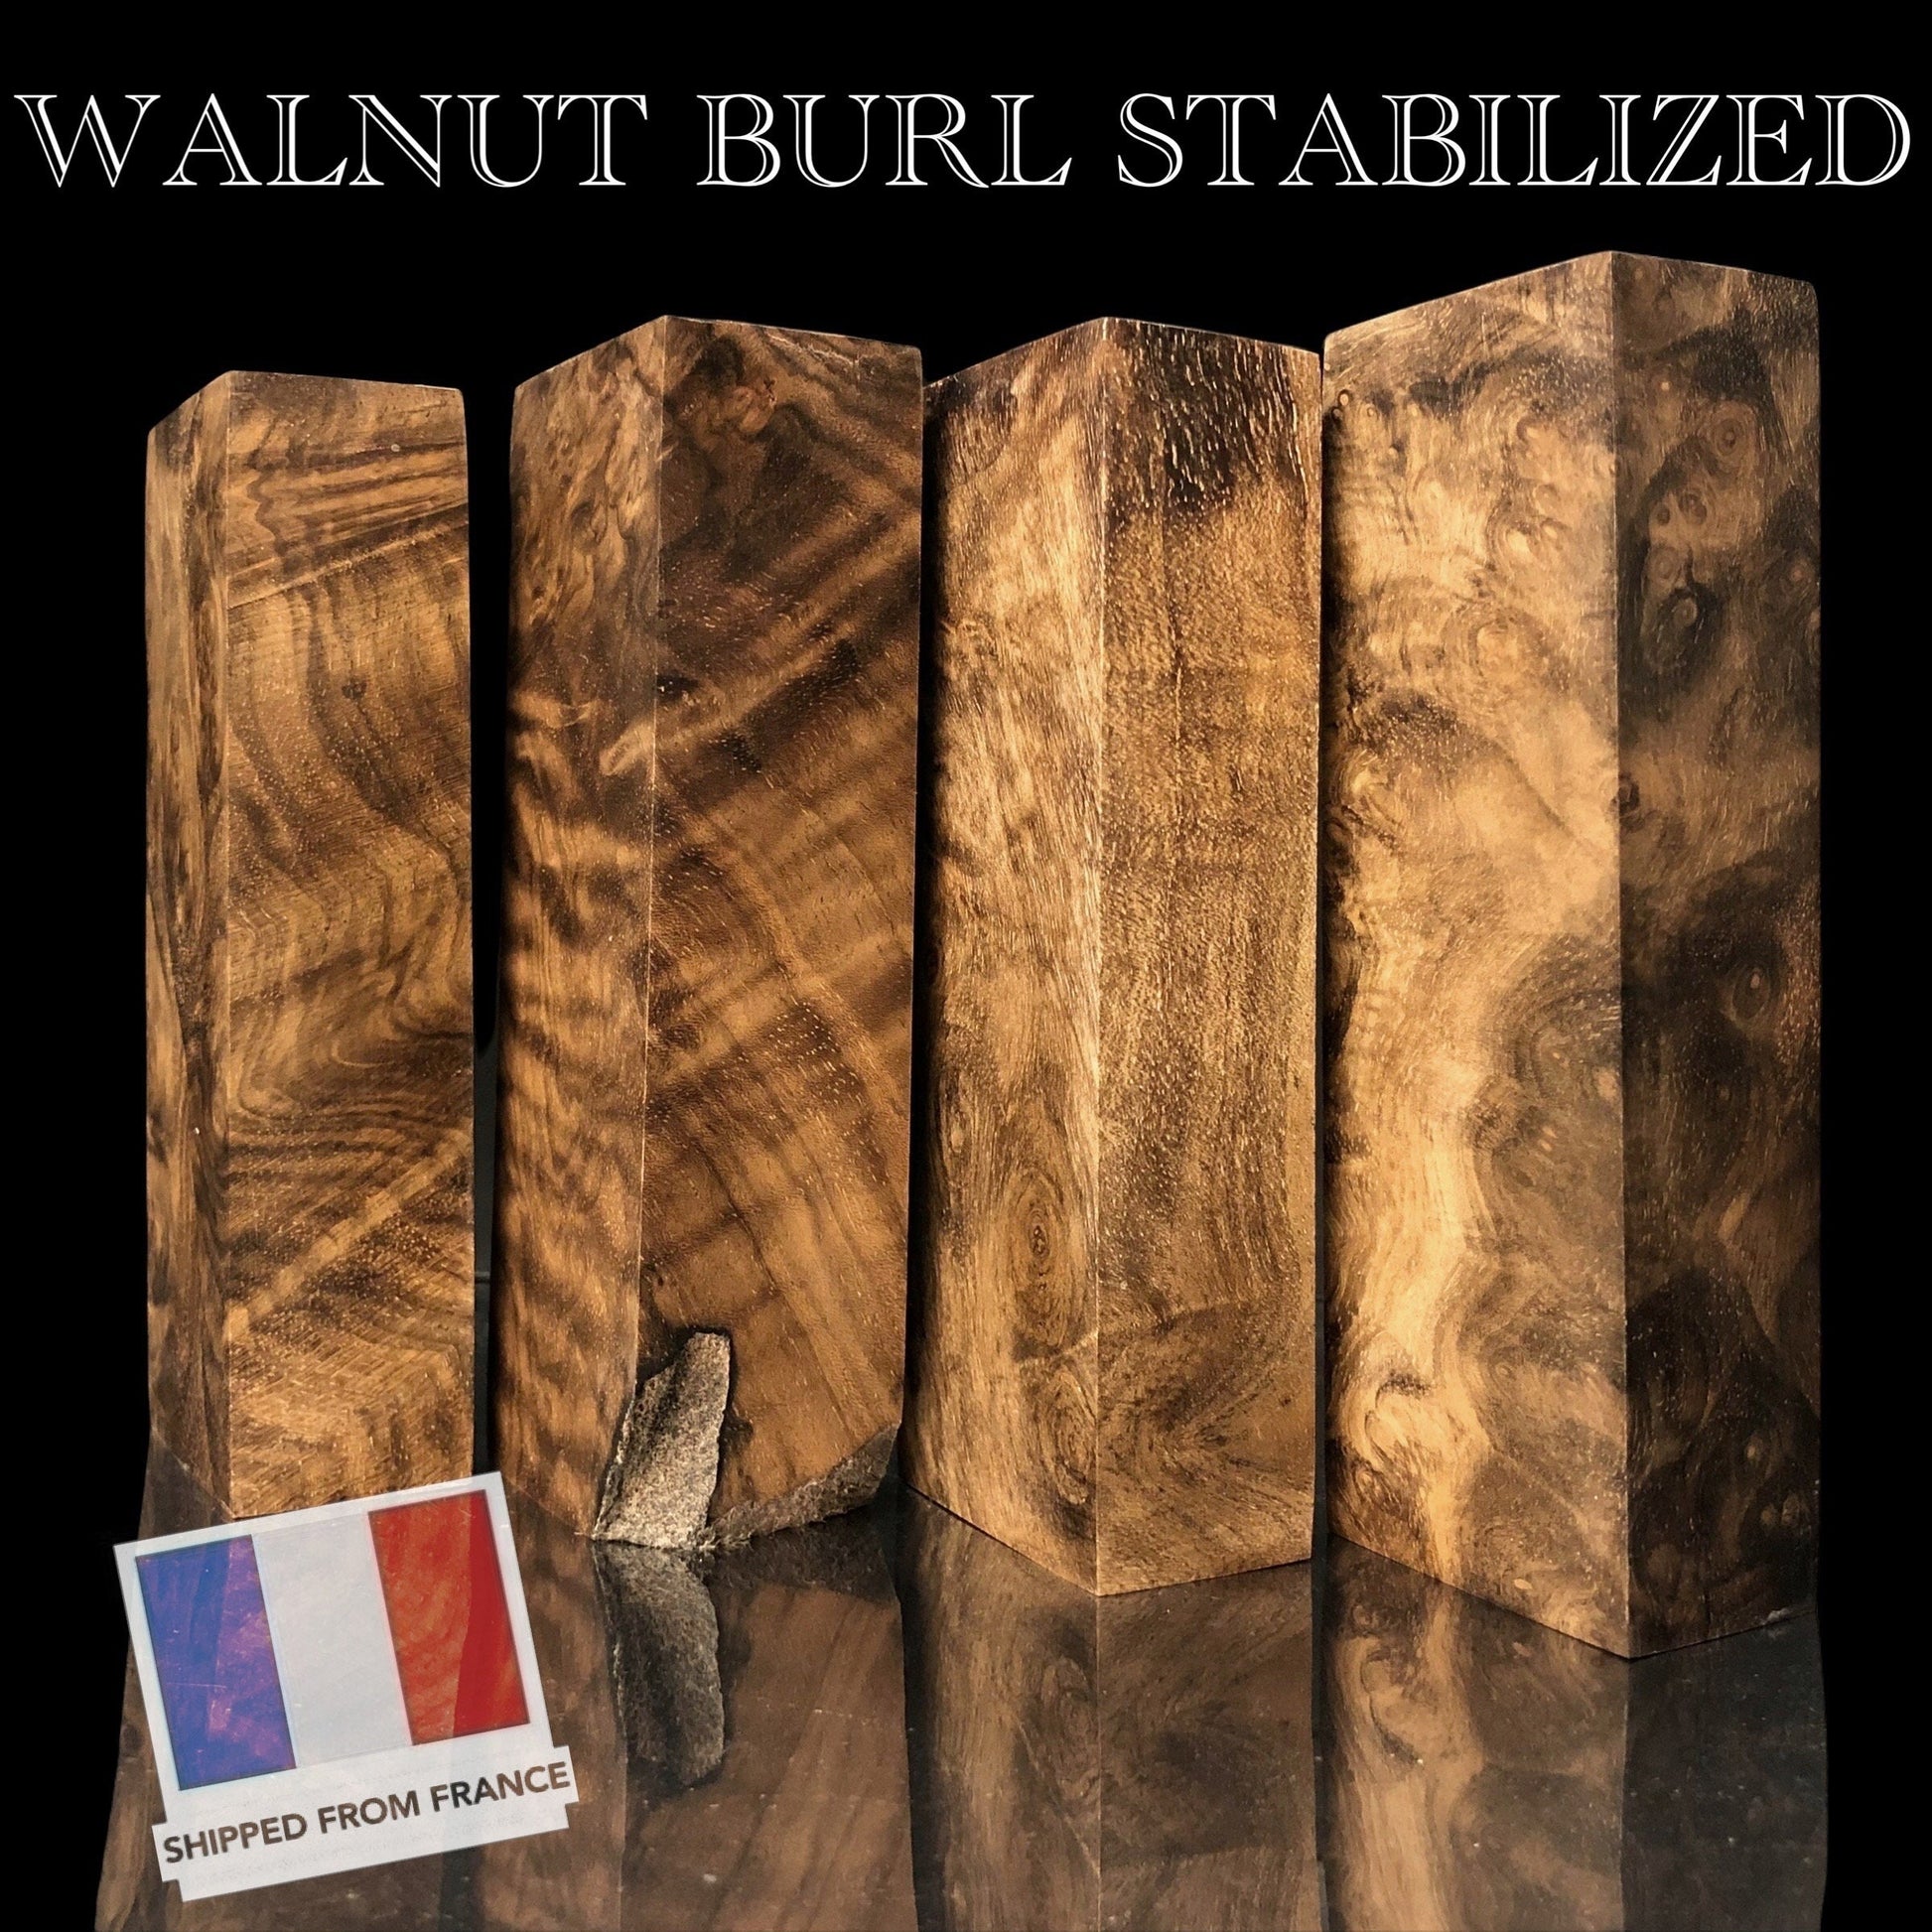 WALNUT BURL Stabilized Wood Very Rare, Blanks for Crafting, Knife Making. France Stock